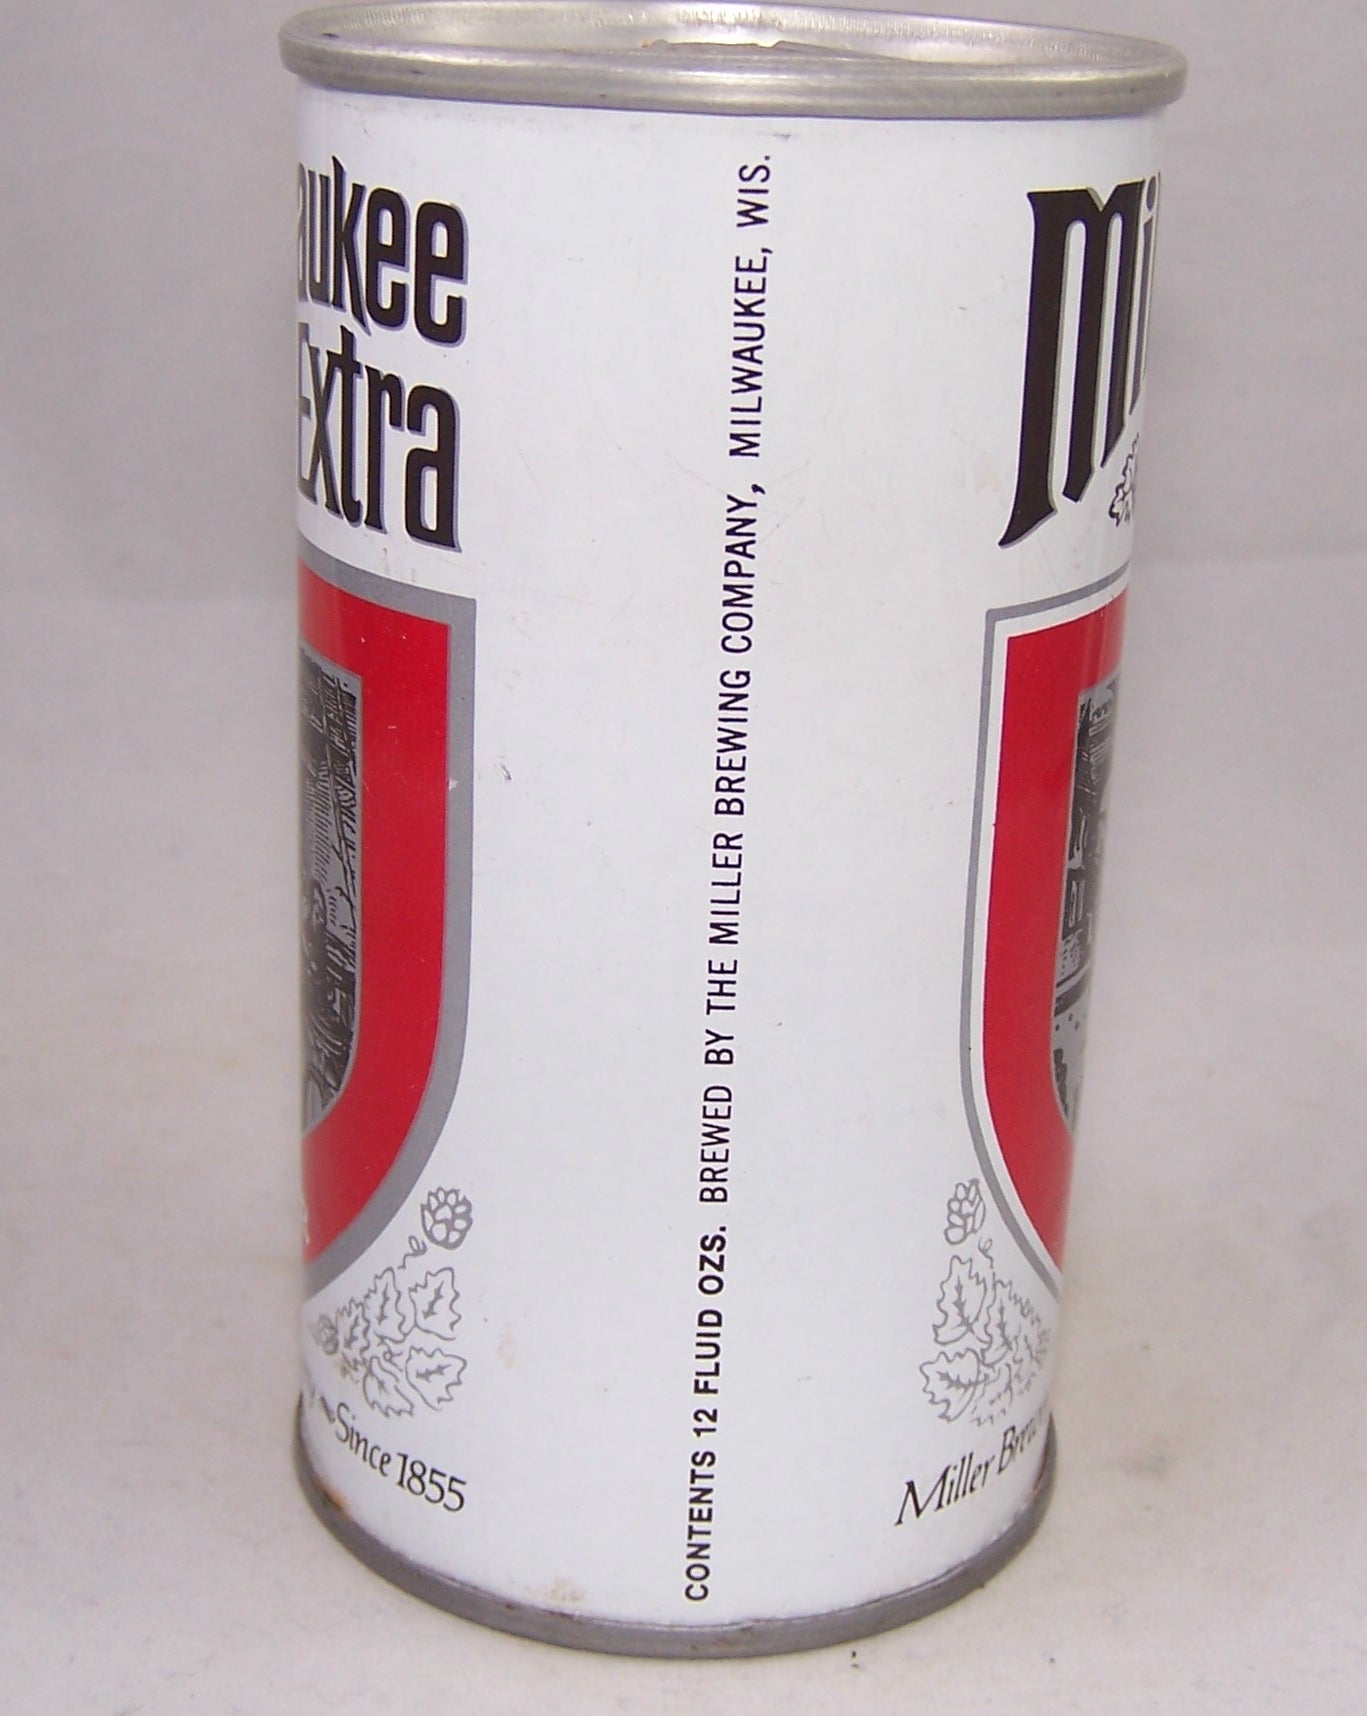 Milwaukee Extra Straight Steel Test Can, USBC 217-05, Grade 1/1+ Sold on 10/10/18